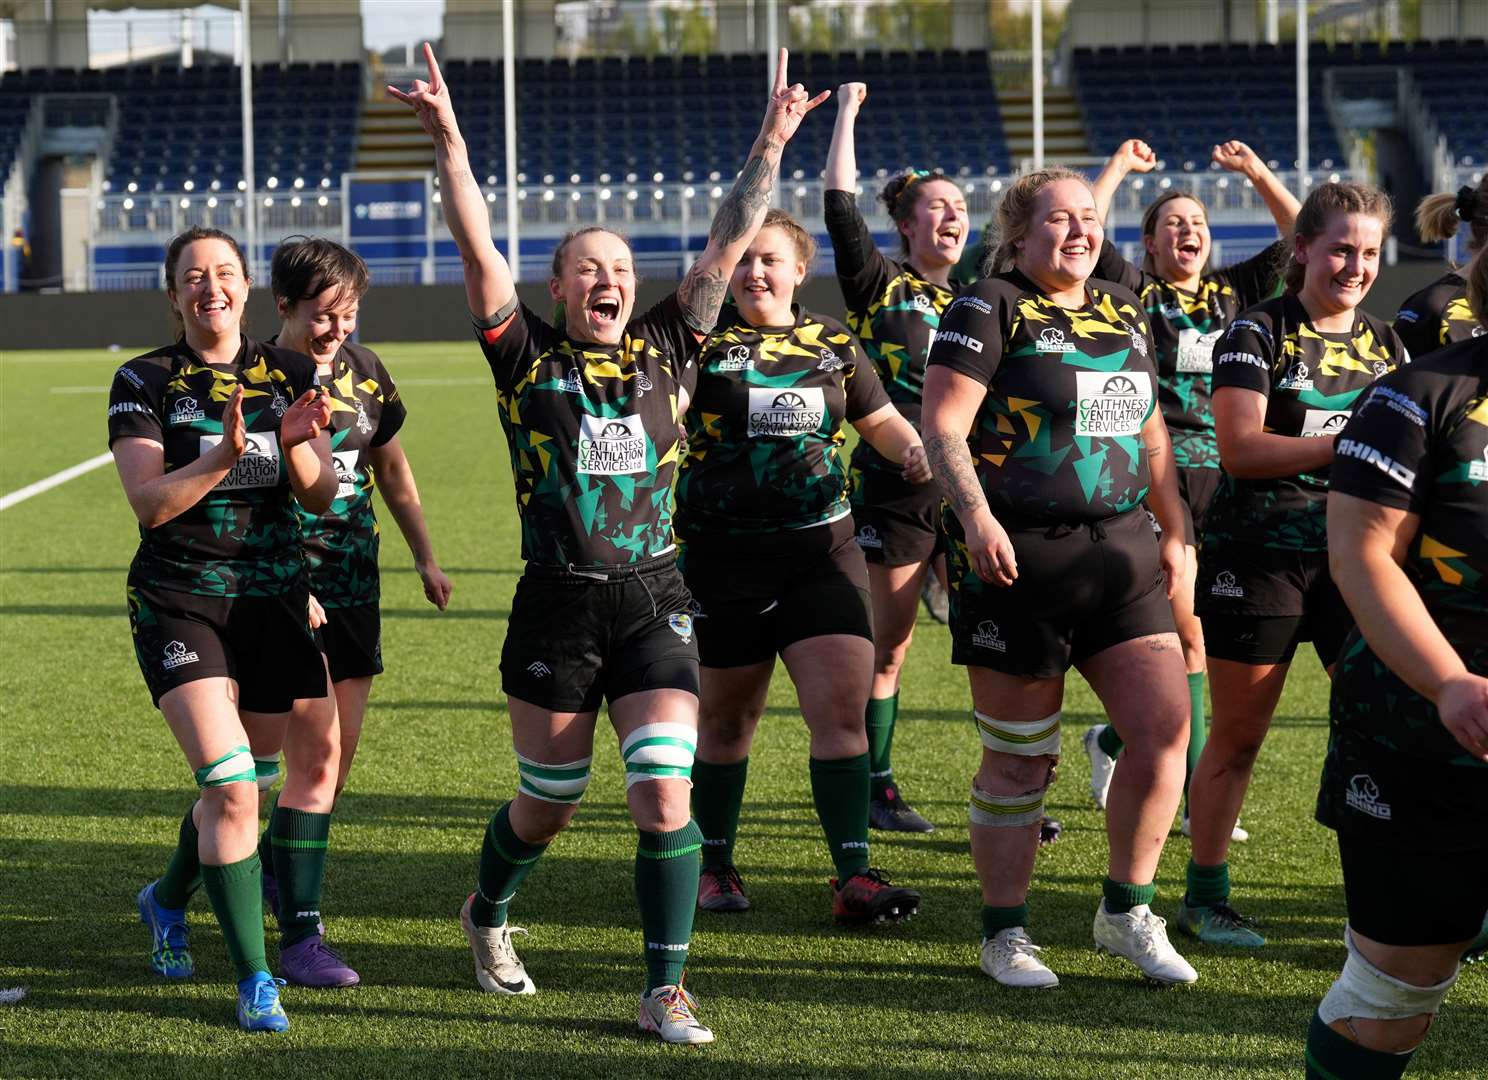 Helen Richard, one of the Krakens' most experienced campaigners, raises her arms in triumph as the Krakens leave the pitch. Picture: Scottish Rugby / SNS